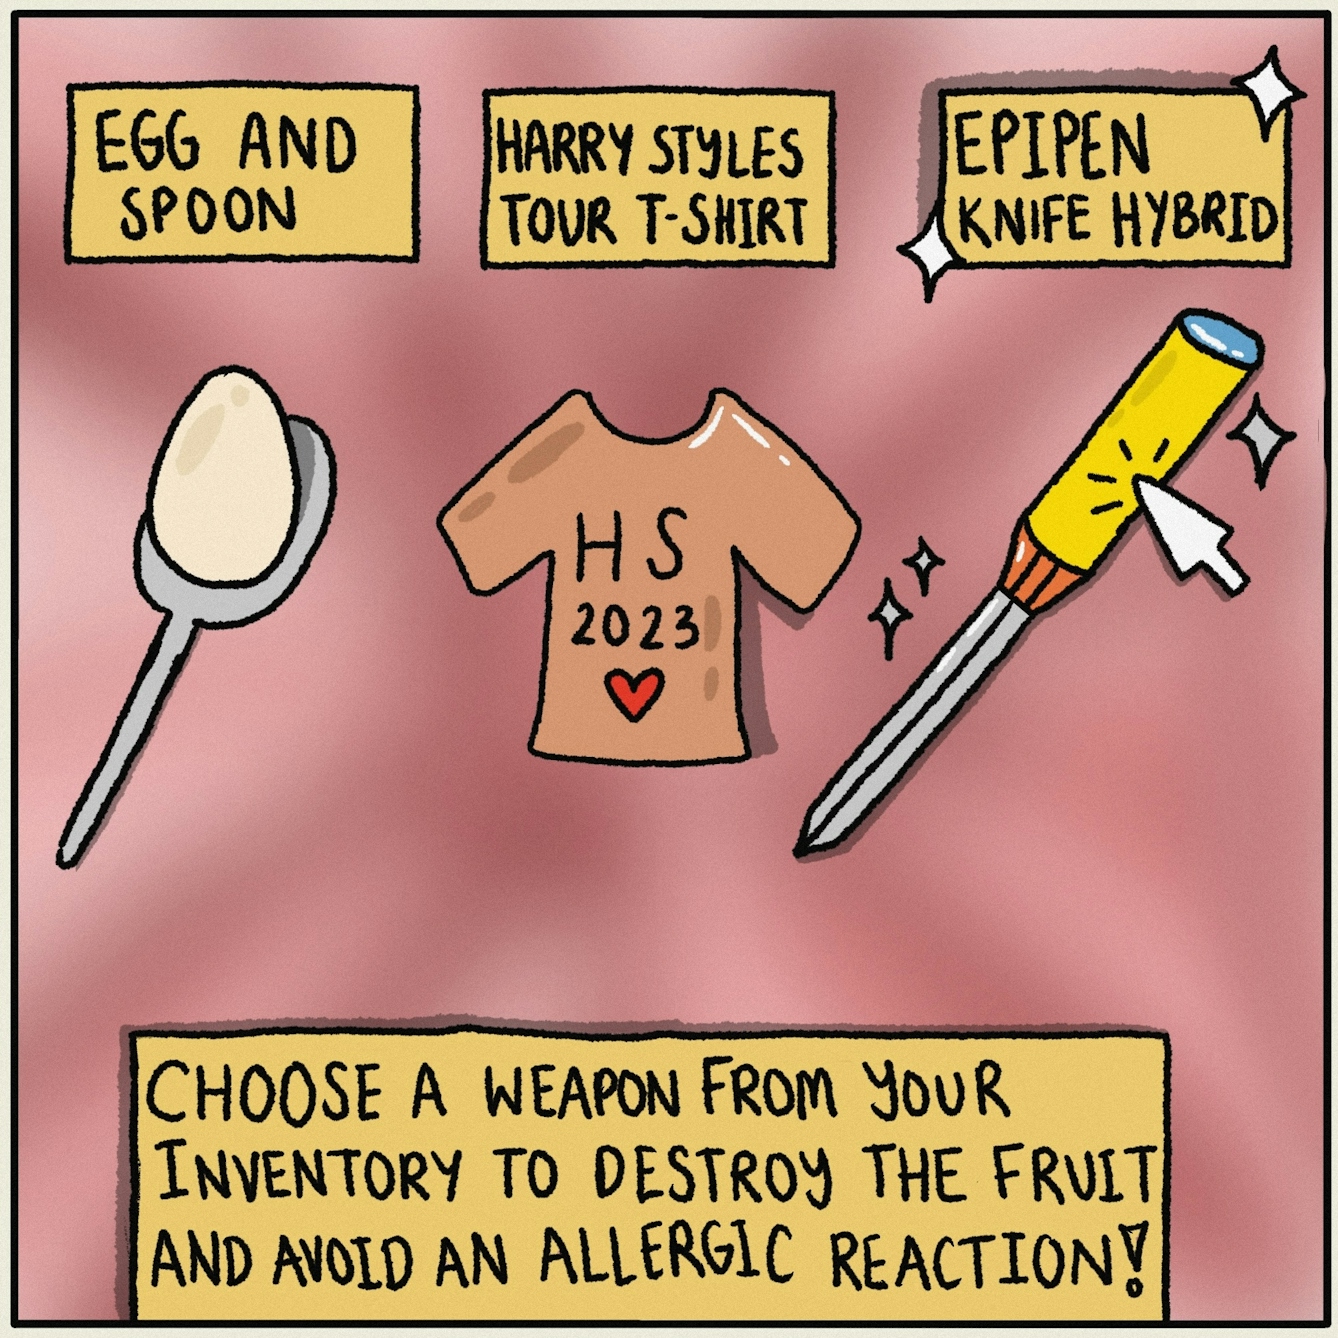 Panel 3 of a digitally drawn, four-panel comic titled ‘Overpowered’. You’re asked to choose a weapon from your inventory to destroy the fruit and avoid an allergic reaction. Your options are an egg and spoon, a Harry Styles tour t-shirt, or a hybrid of an EpiPen and knife. The cursor shows you’re choosing the EpiPen-knife hybrid.  